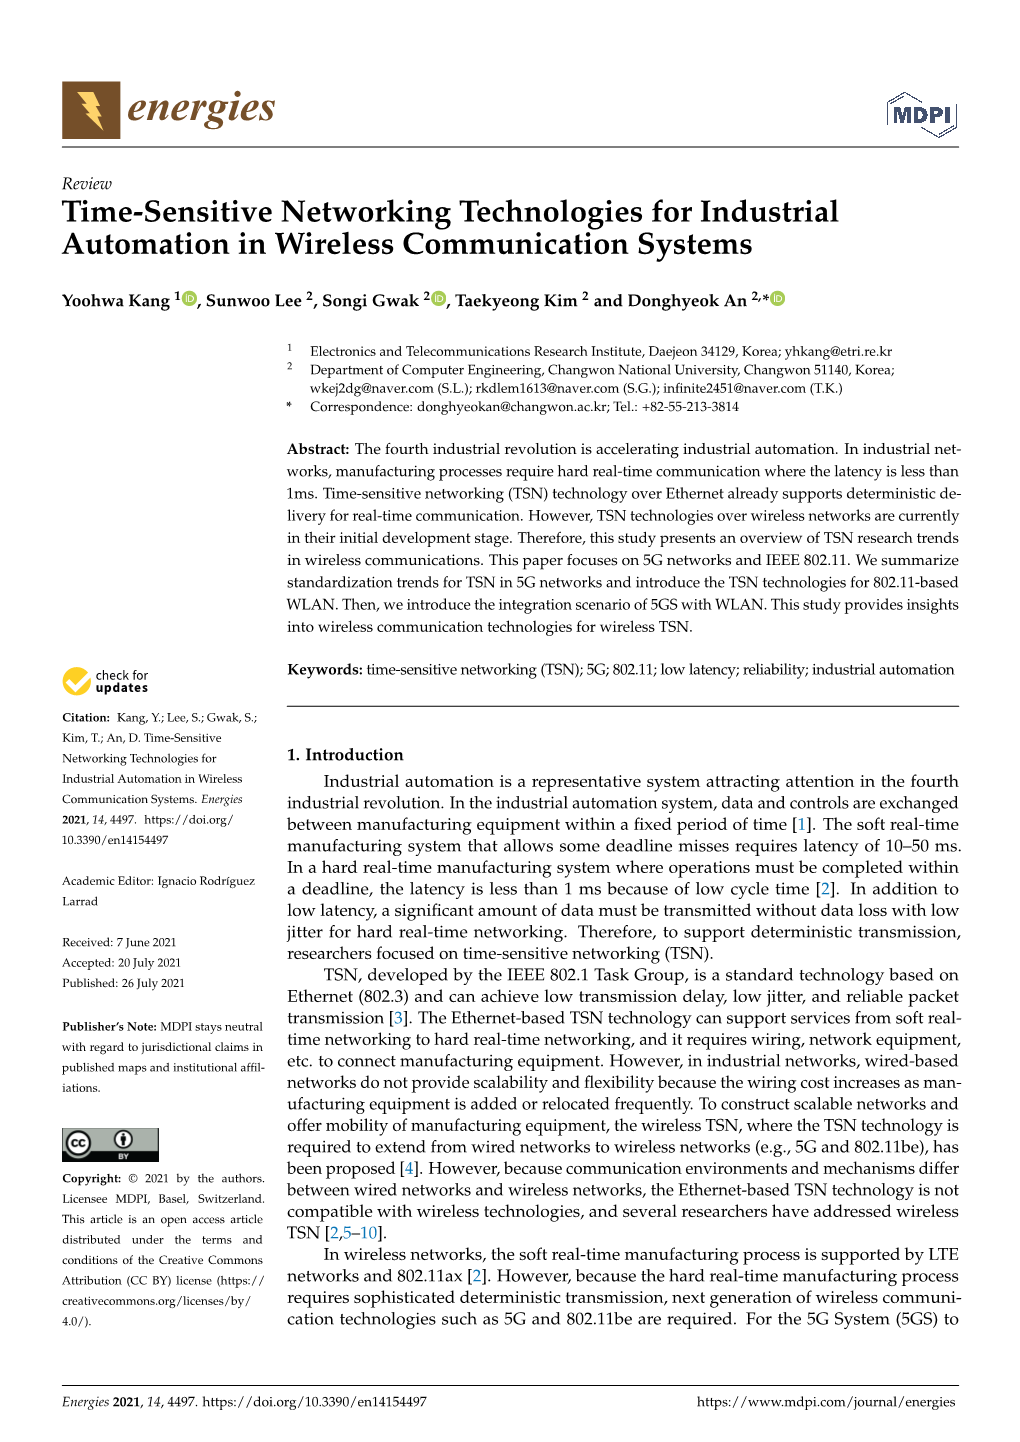 Time-Sensitive Networking Technologies for Industrial Automation in Wireless Communication Systems